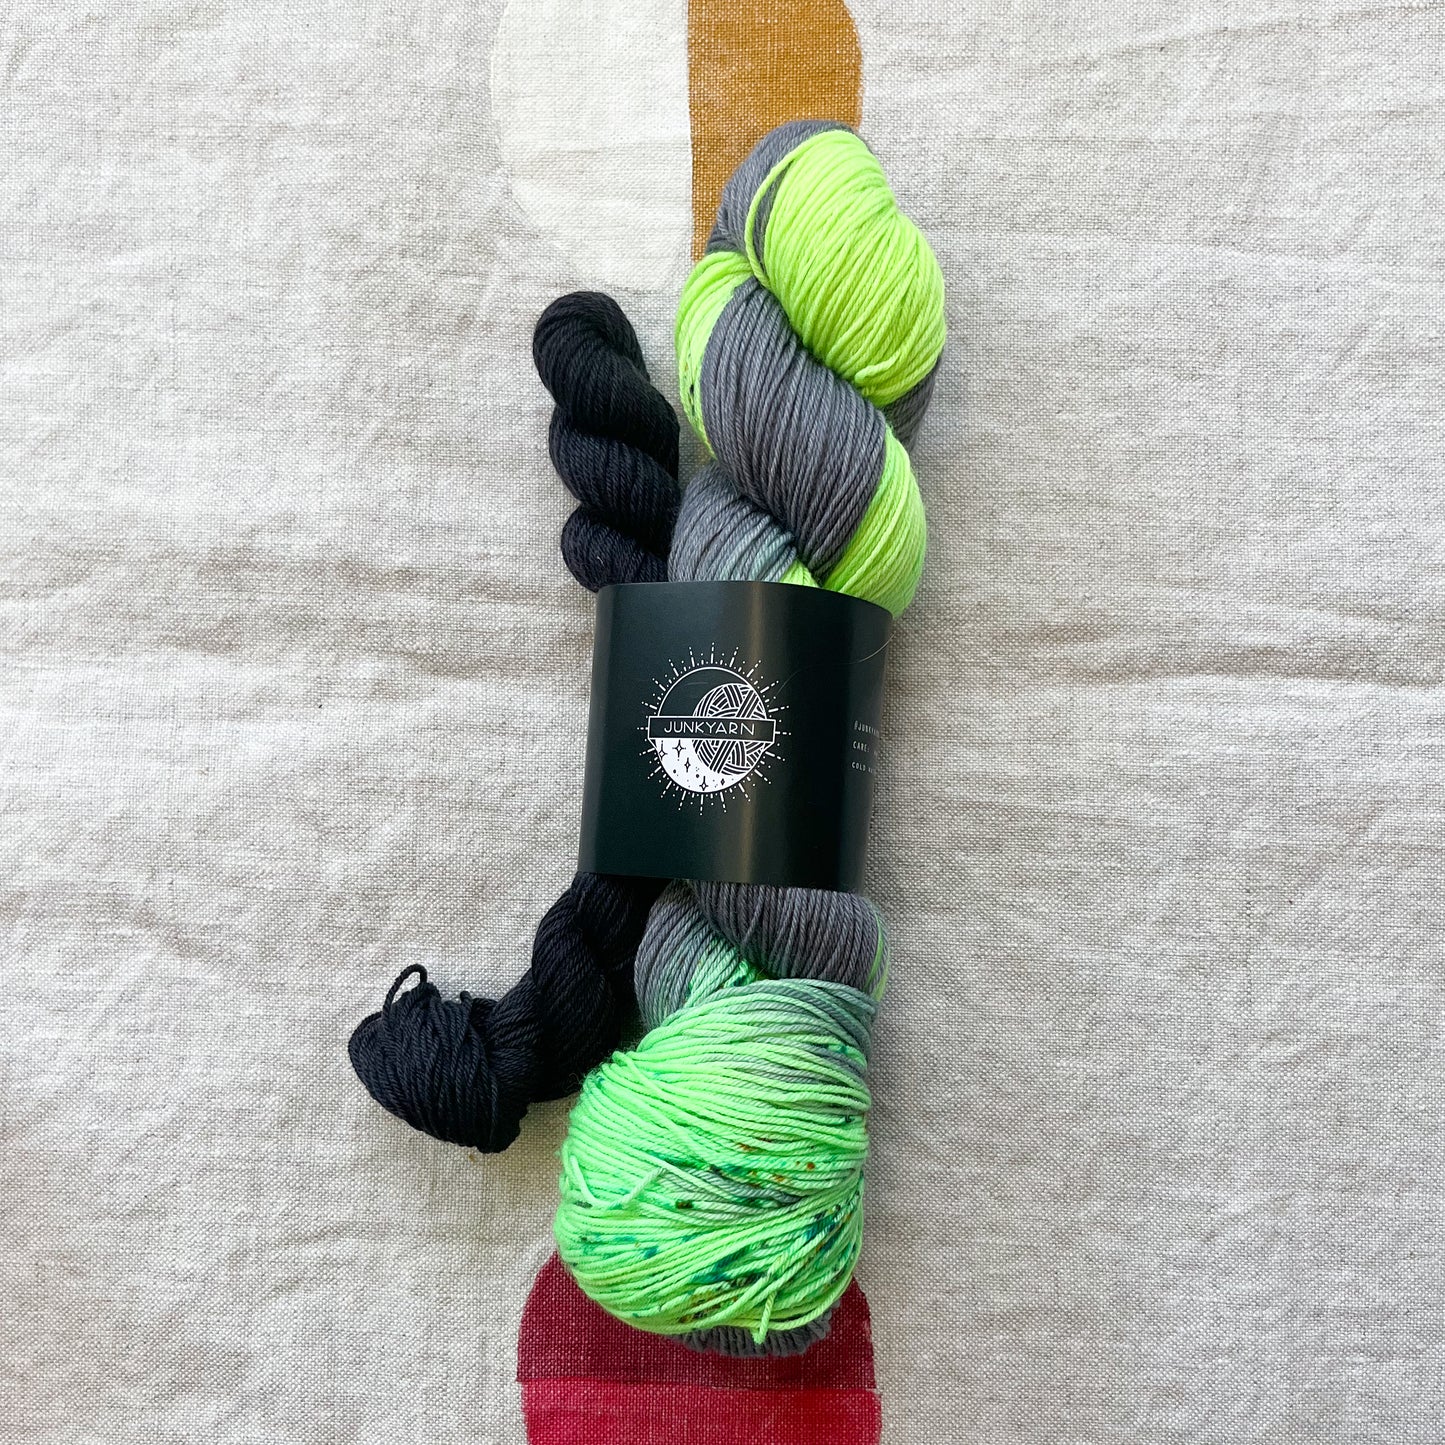 Witches Stocking Sock Sets and Single Skeins